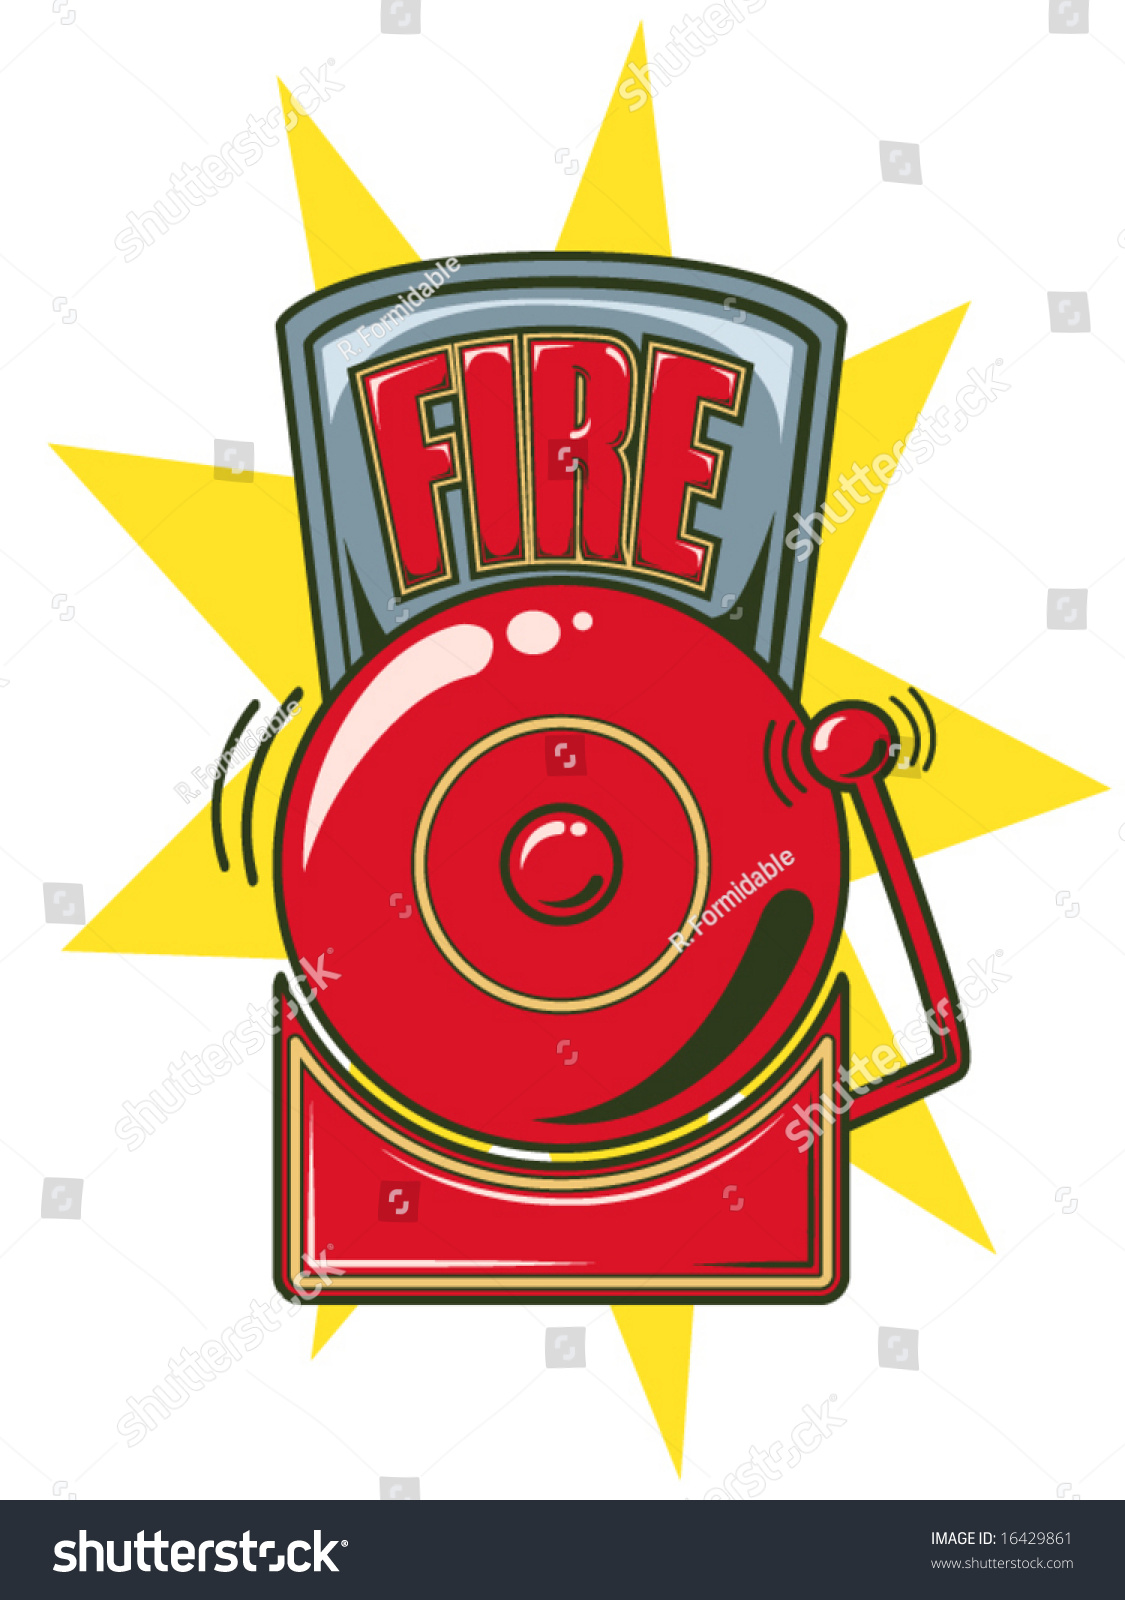 fire panel clipart - photo #41